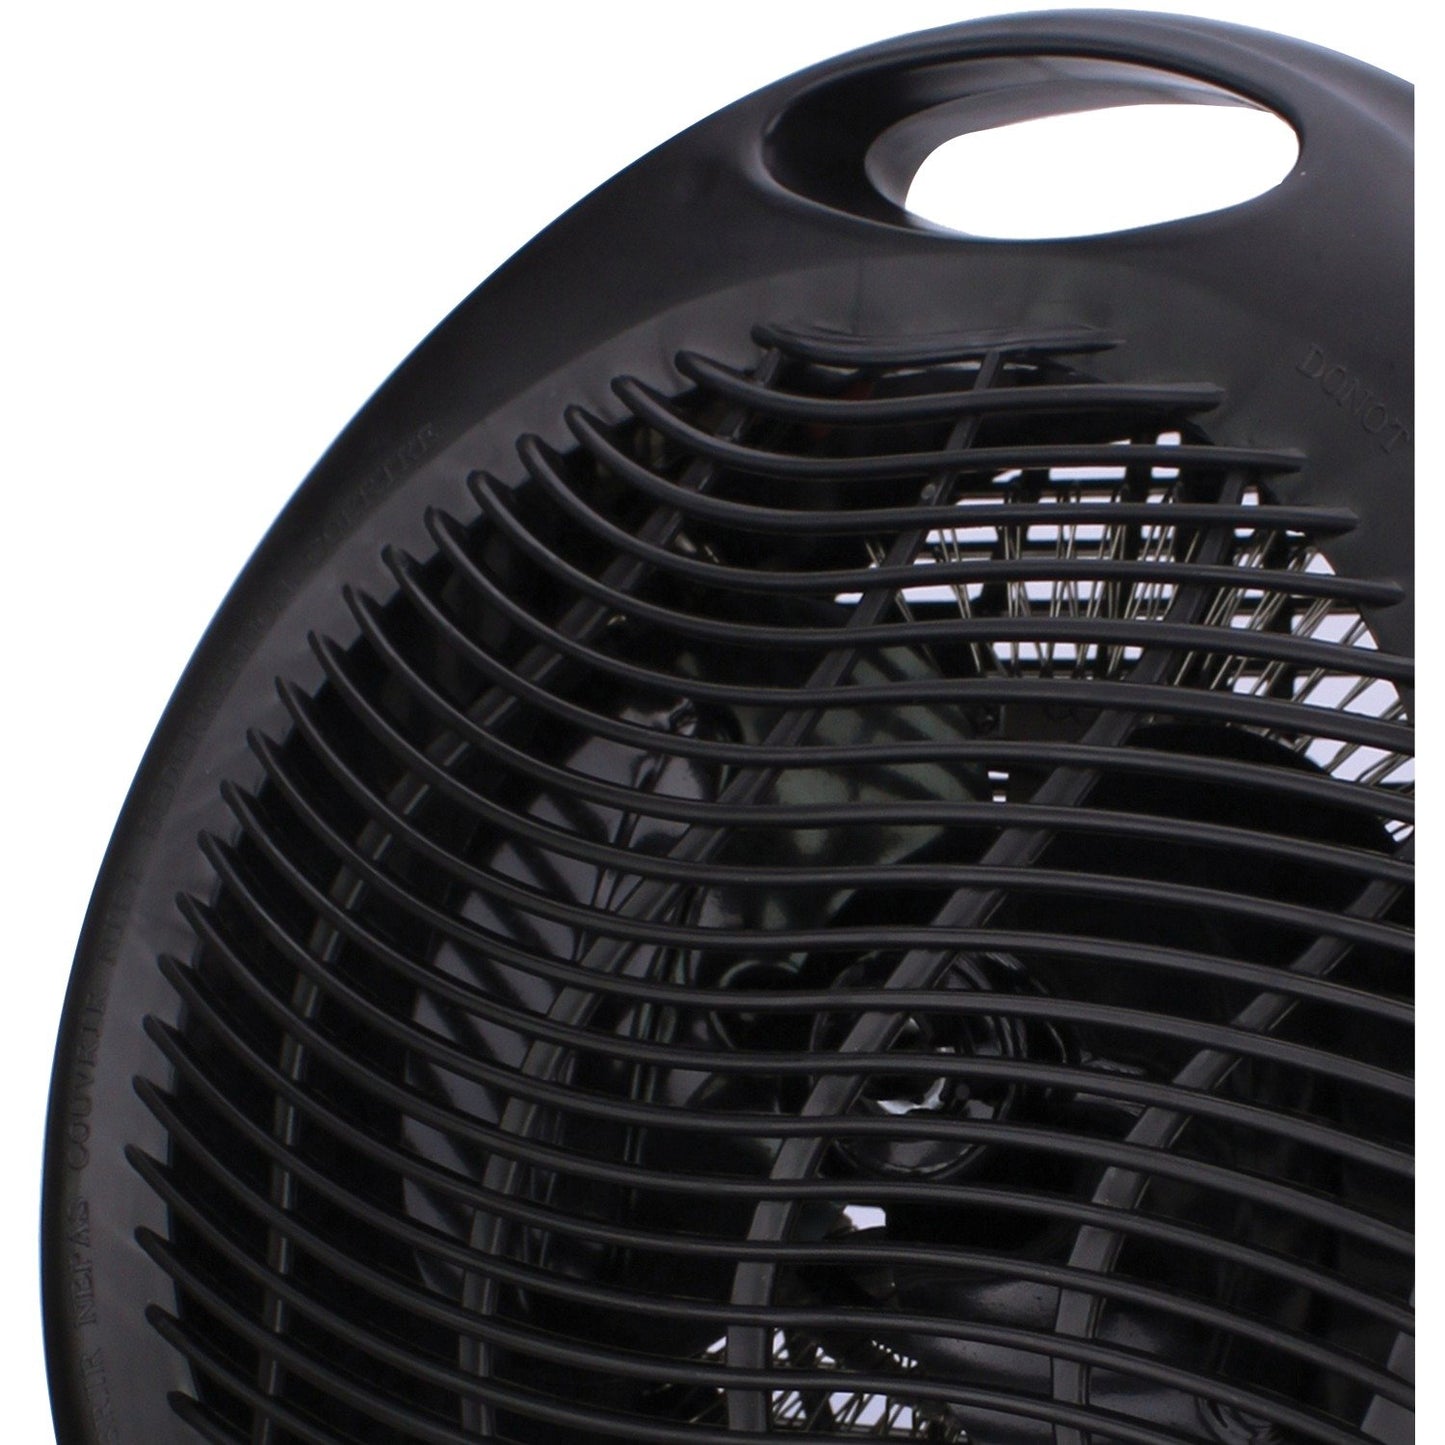 BRENTWOOD H-F301BK Portable Electric Space Heater & Fan (Black)